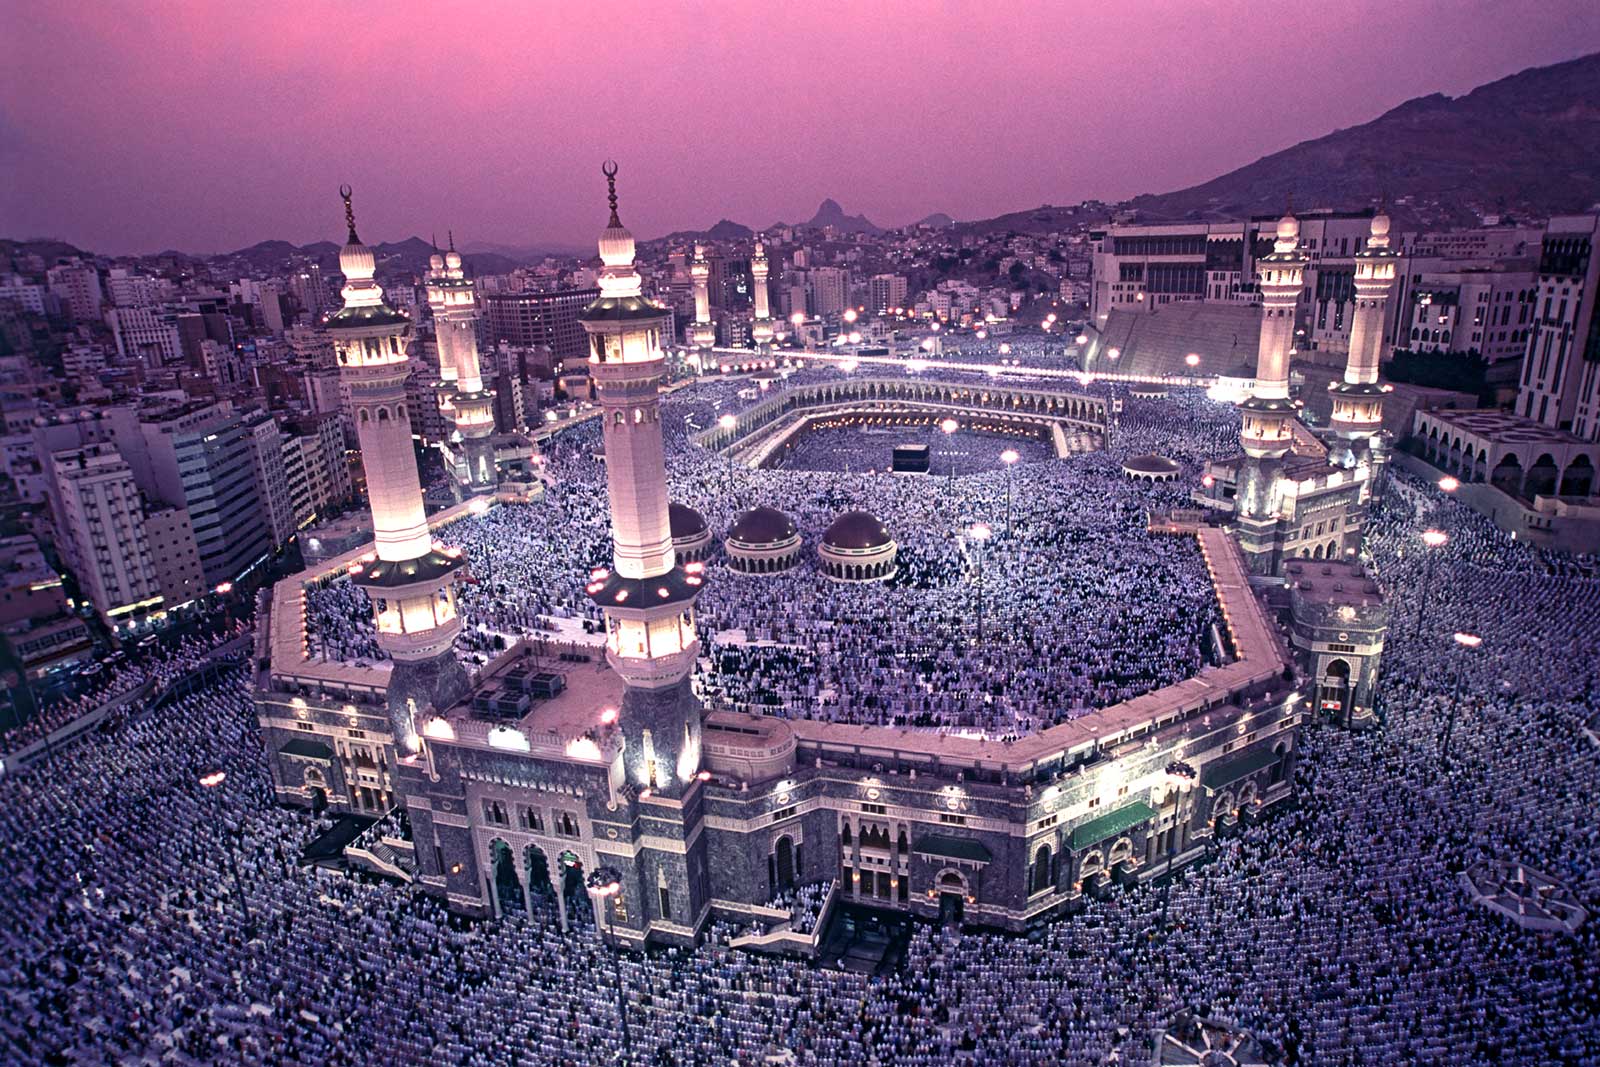 Mecca Great Mosque